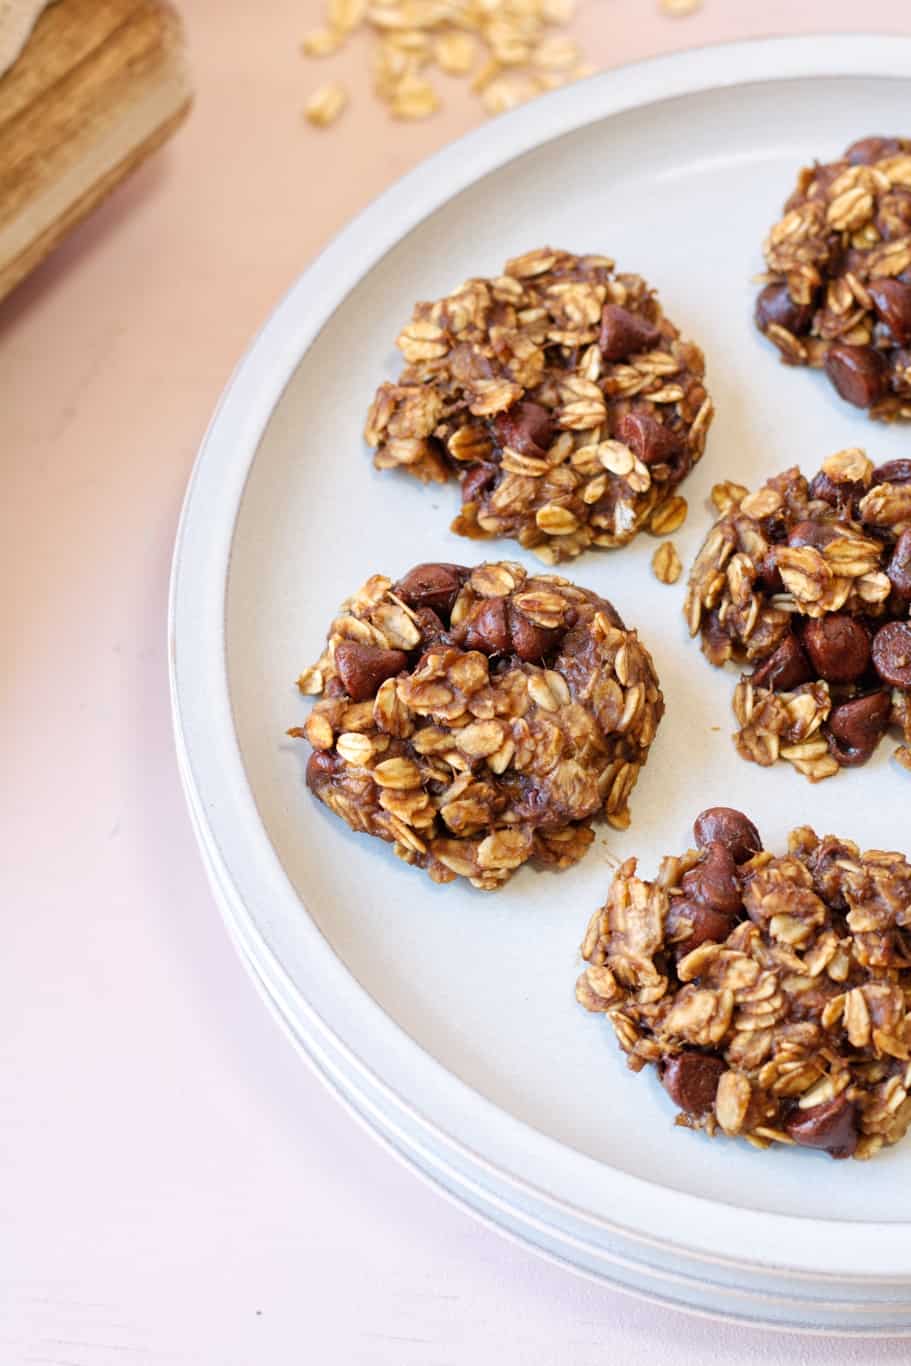 Fluffy banana oatmeal cookies made with a simple mix of bananas, oats, peanut butter, and chocolate bits. 